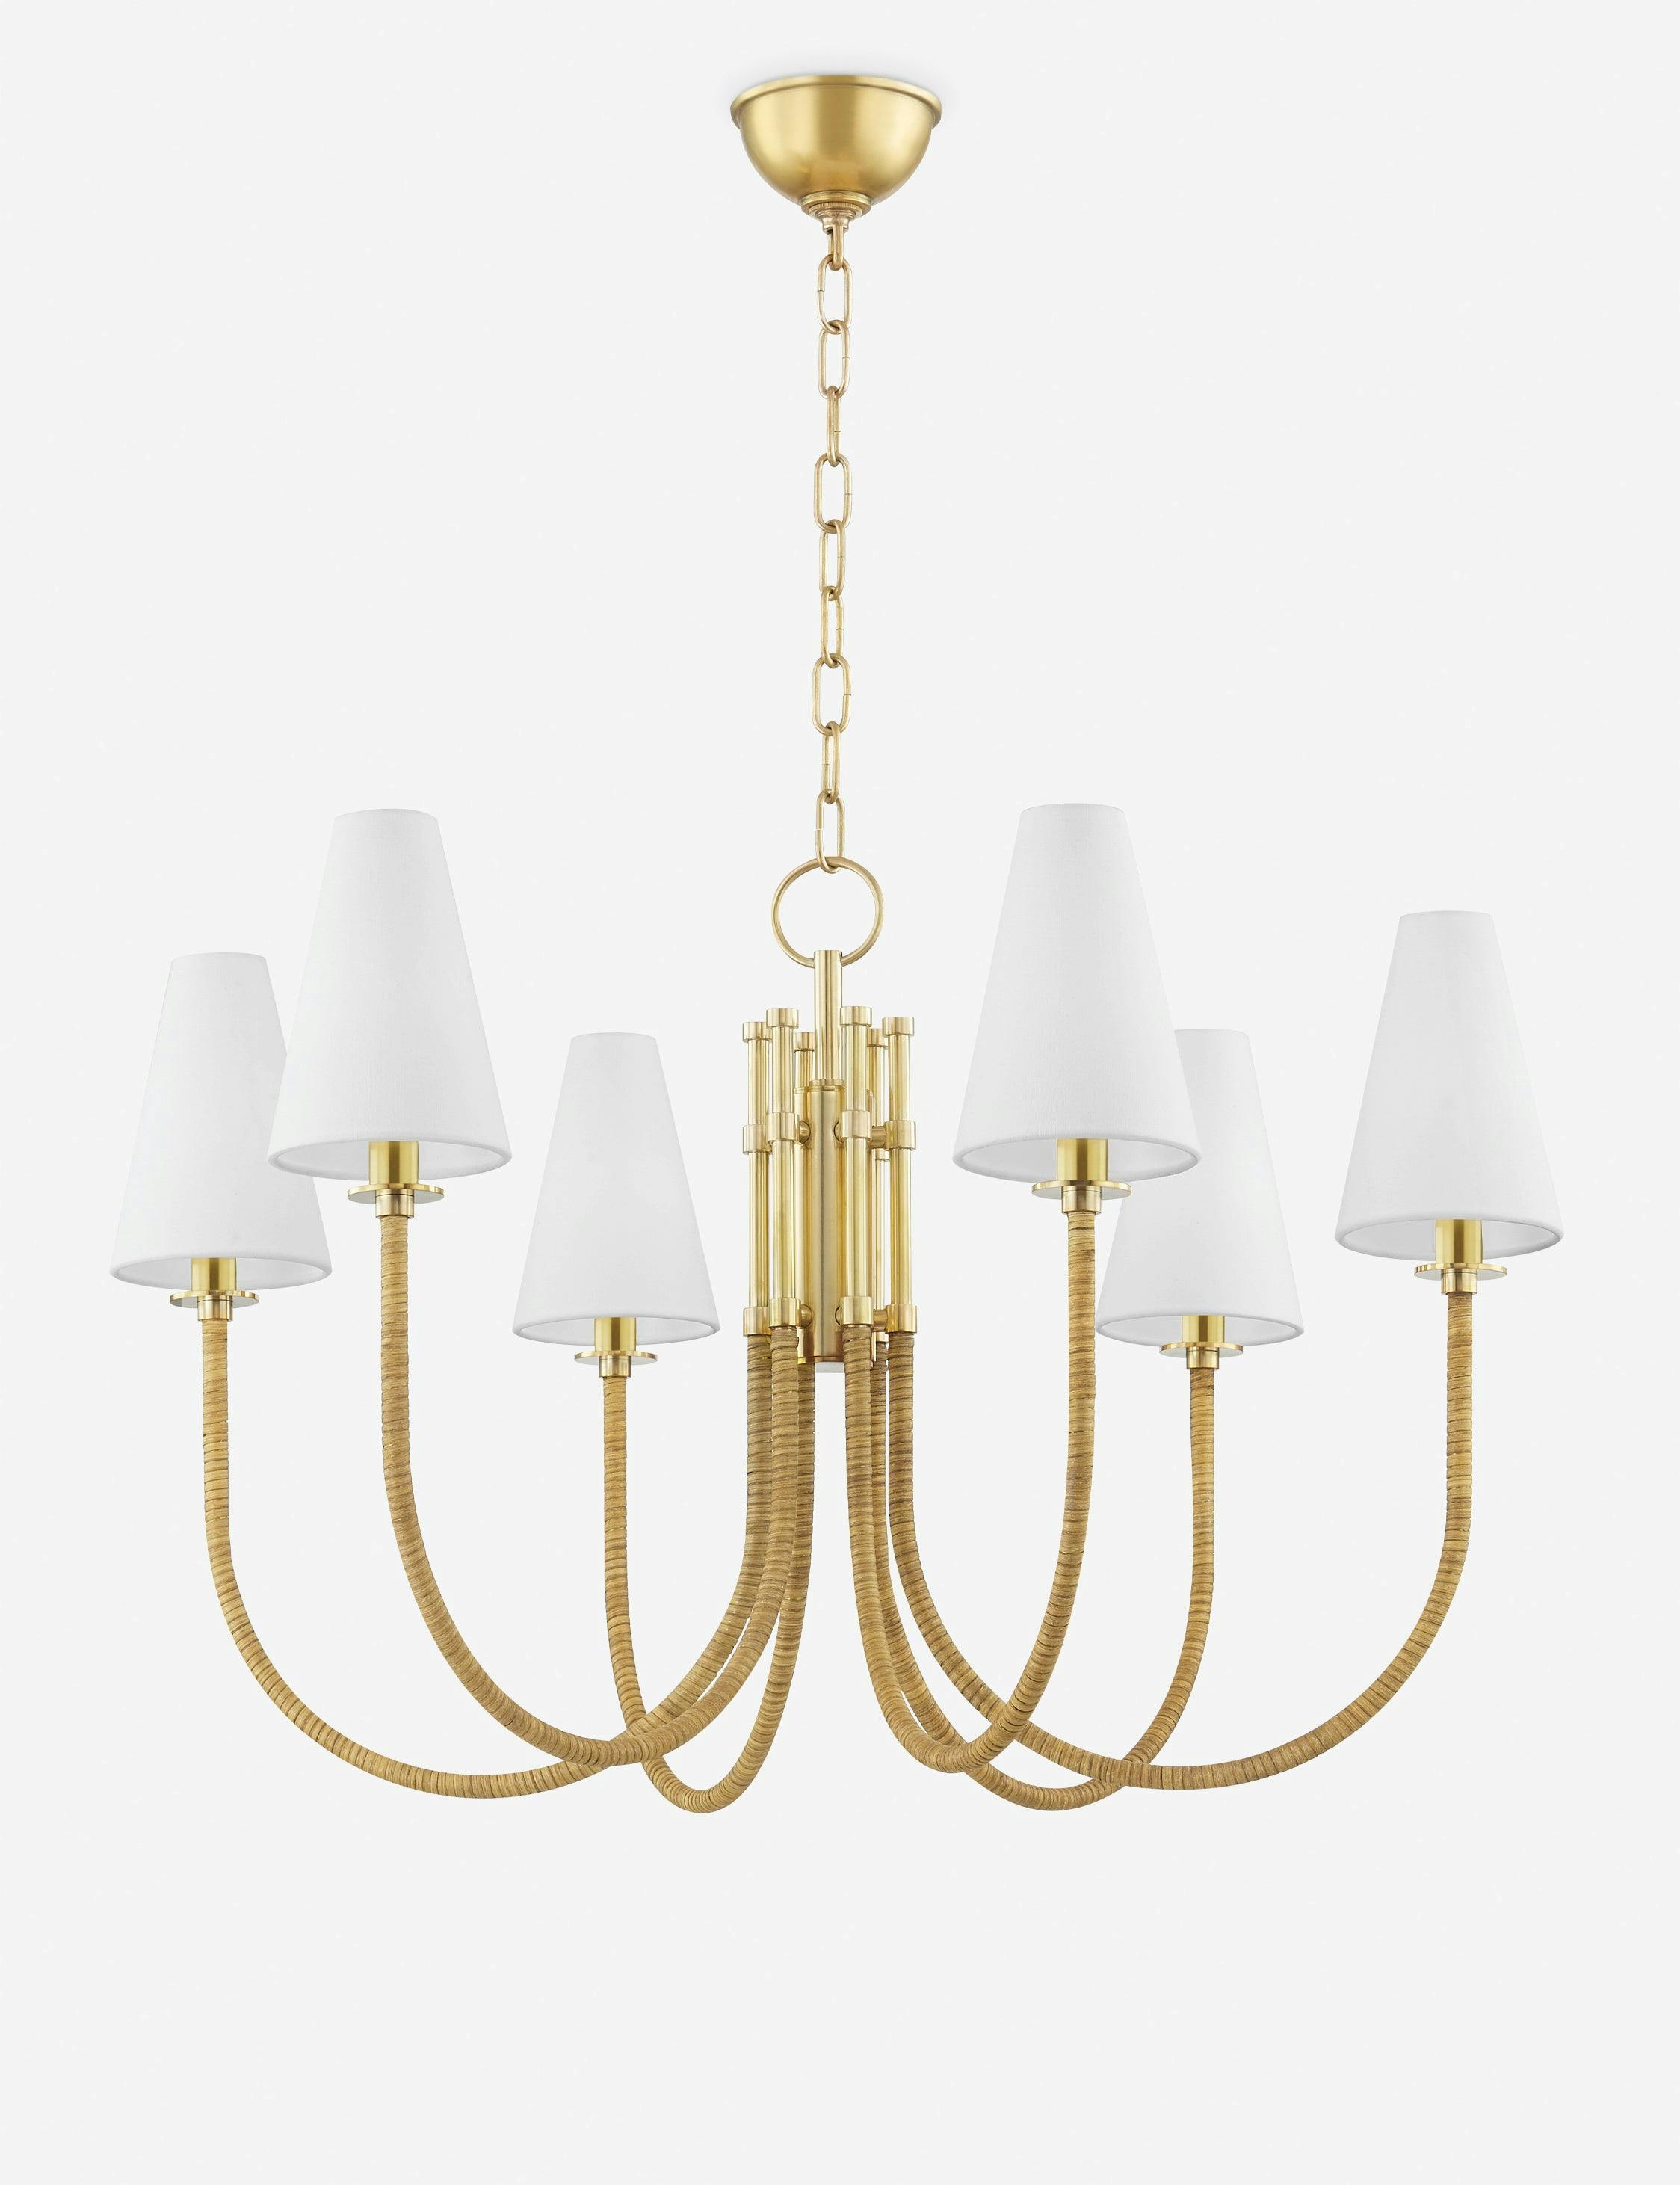 Ripley Aged Brass 6-Light Chandelier with White Belgian Linen Shades